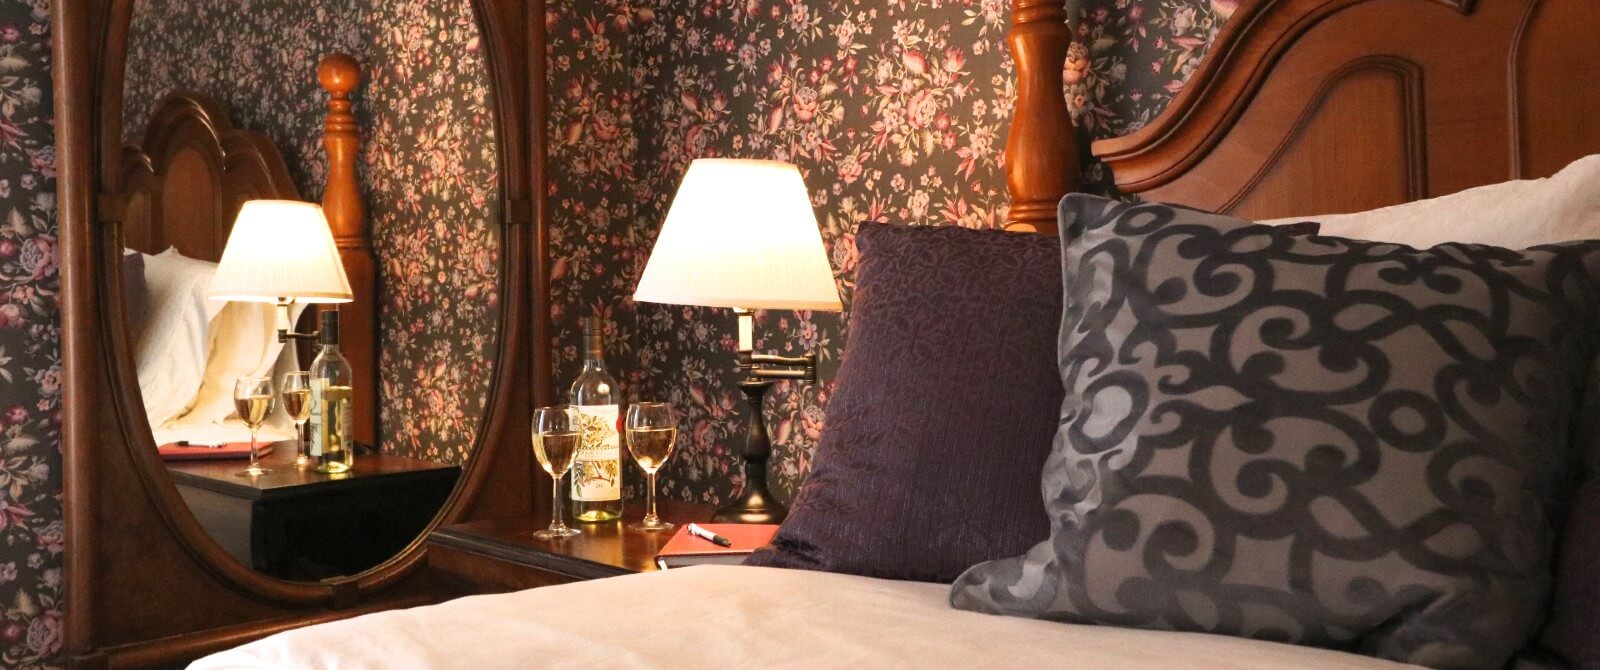 Bedroom with floral wallpaper, queen bed, side table with two glasses and a bottle of white wine